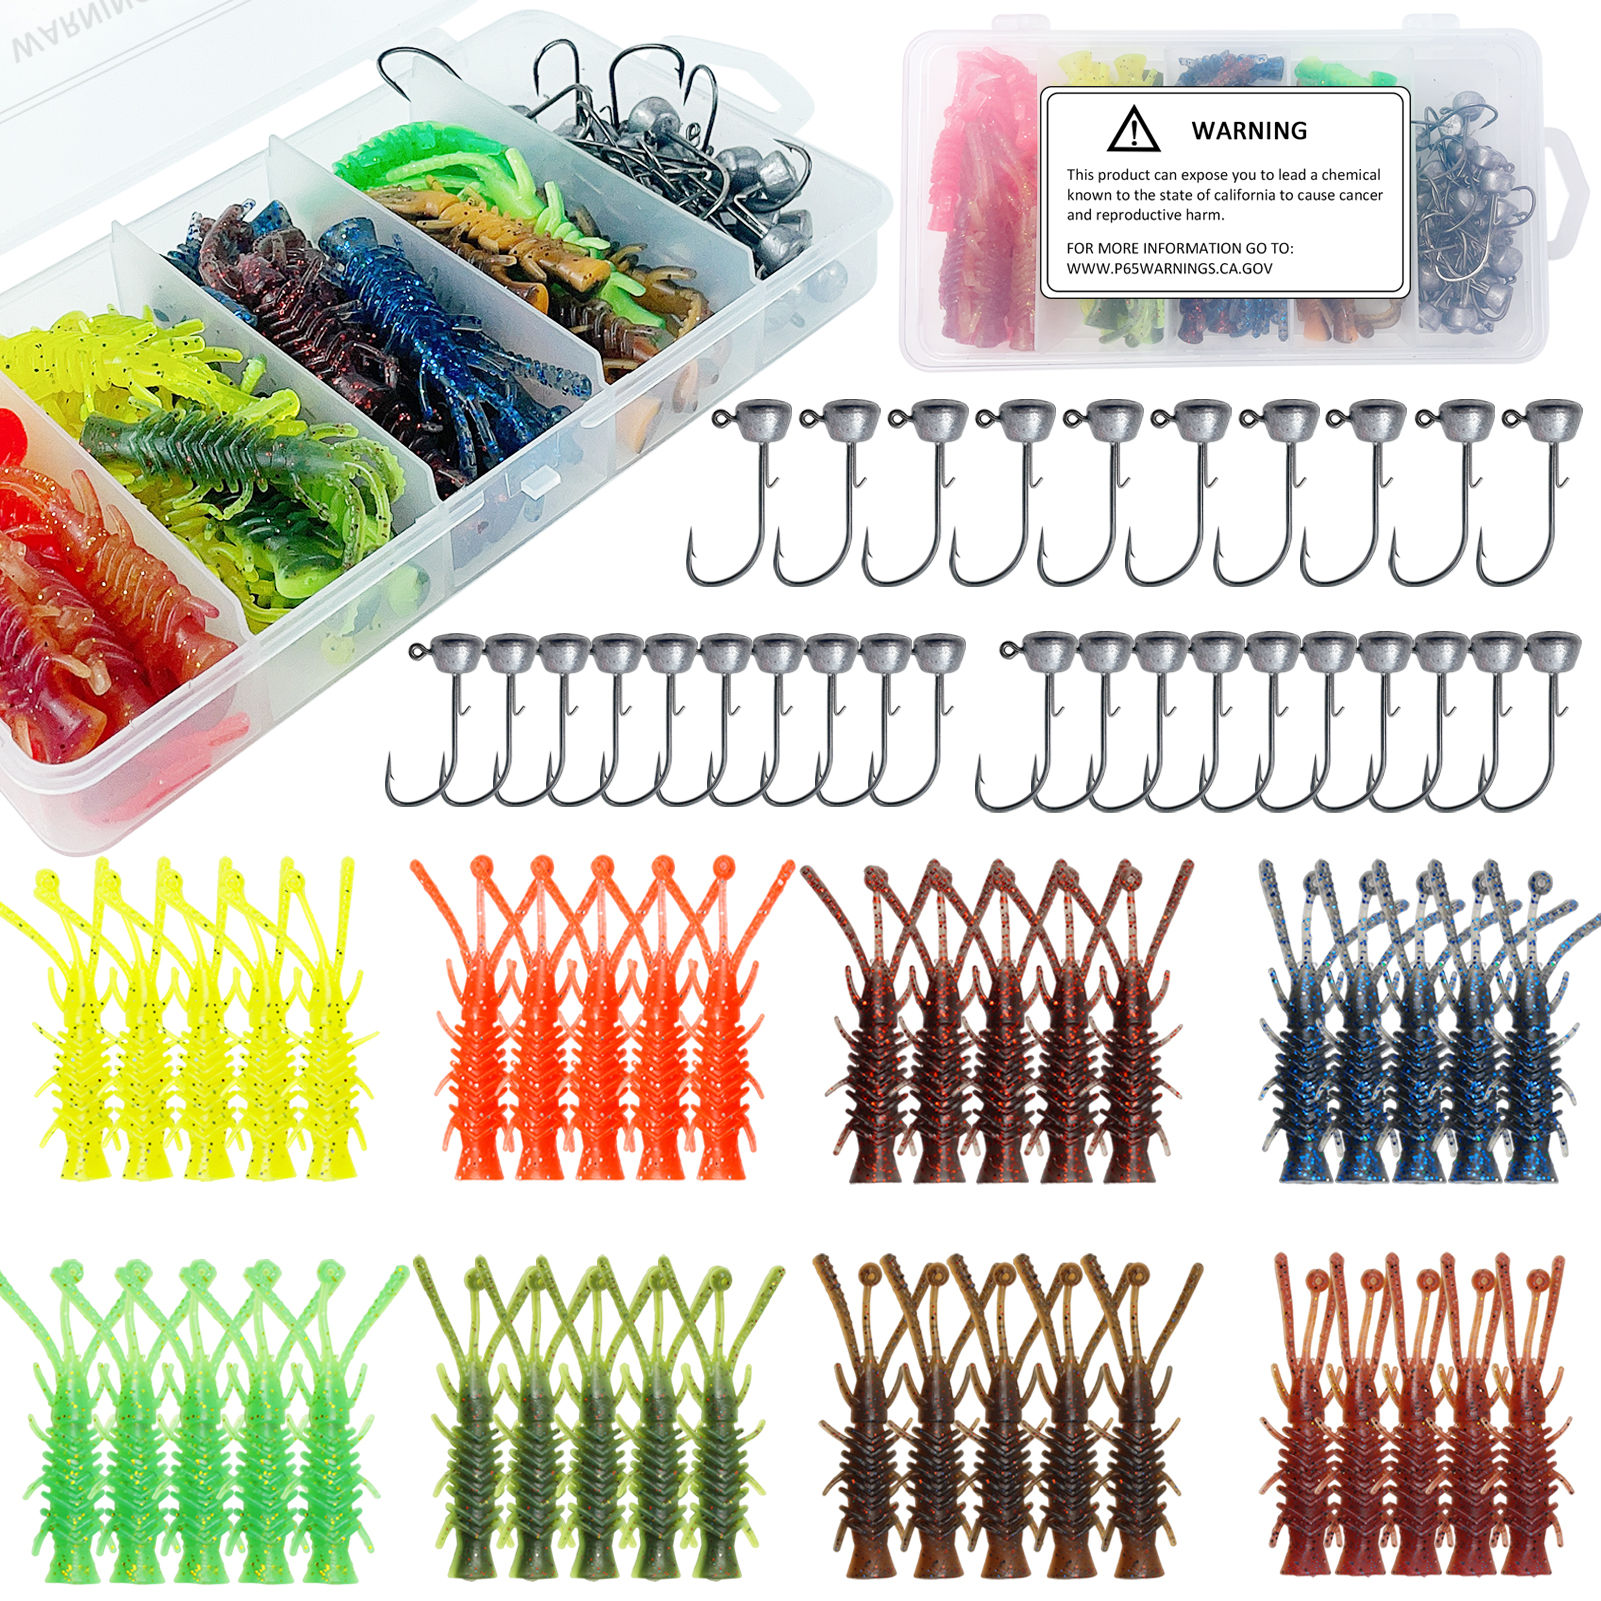 FREE FISHER Fishing Lead Head Jig Hooks with Soft Lures 6.5cm 2g NEID FLOATING SHRIMPS Swimbaits Fishing Jigs 2.5-5g Walleye Shad Baits for Bass(Pack of 71)